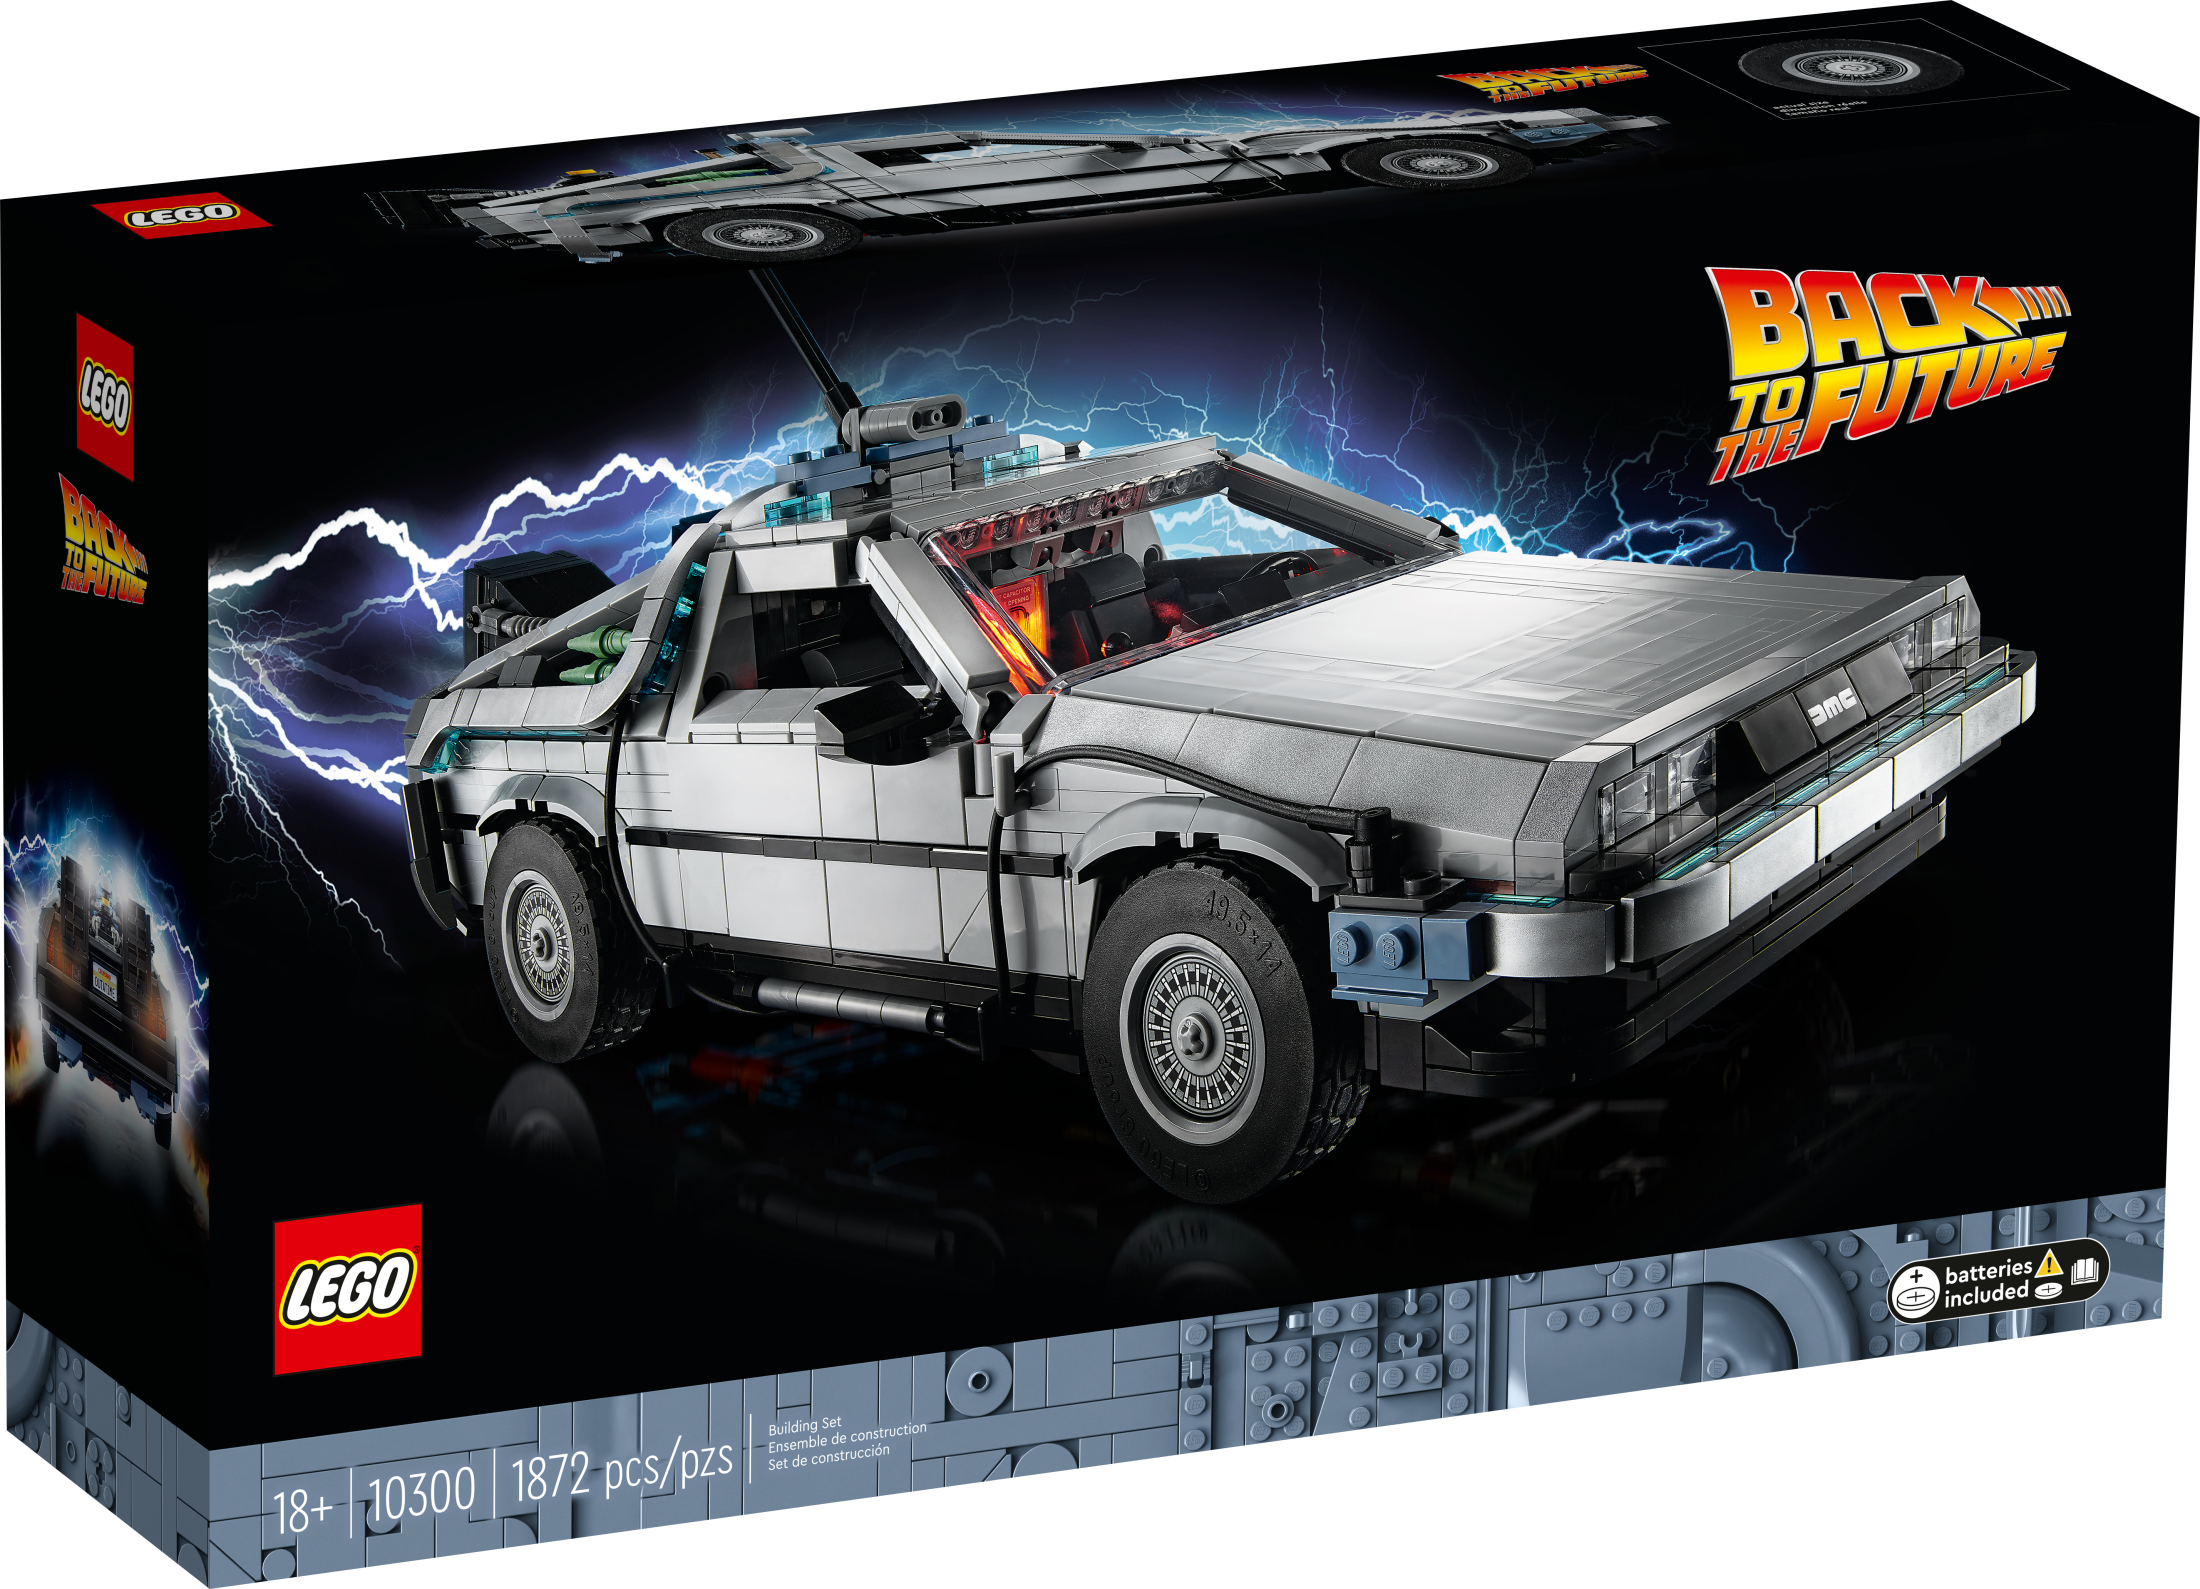 LEGO Icons Back to the Future Time Machine 10300, Model Car Building Kit, Based on the DeLorean from the Classic Movie - image 4 of 9